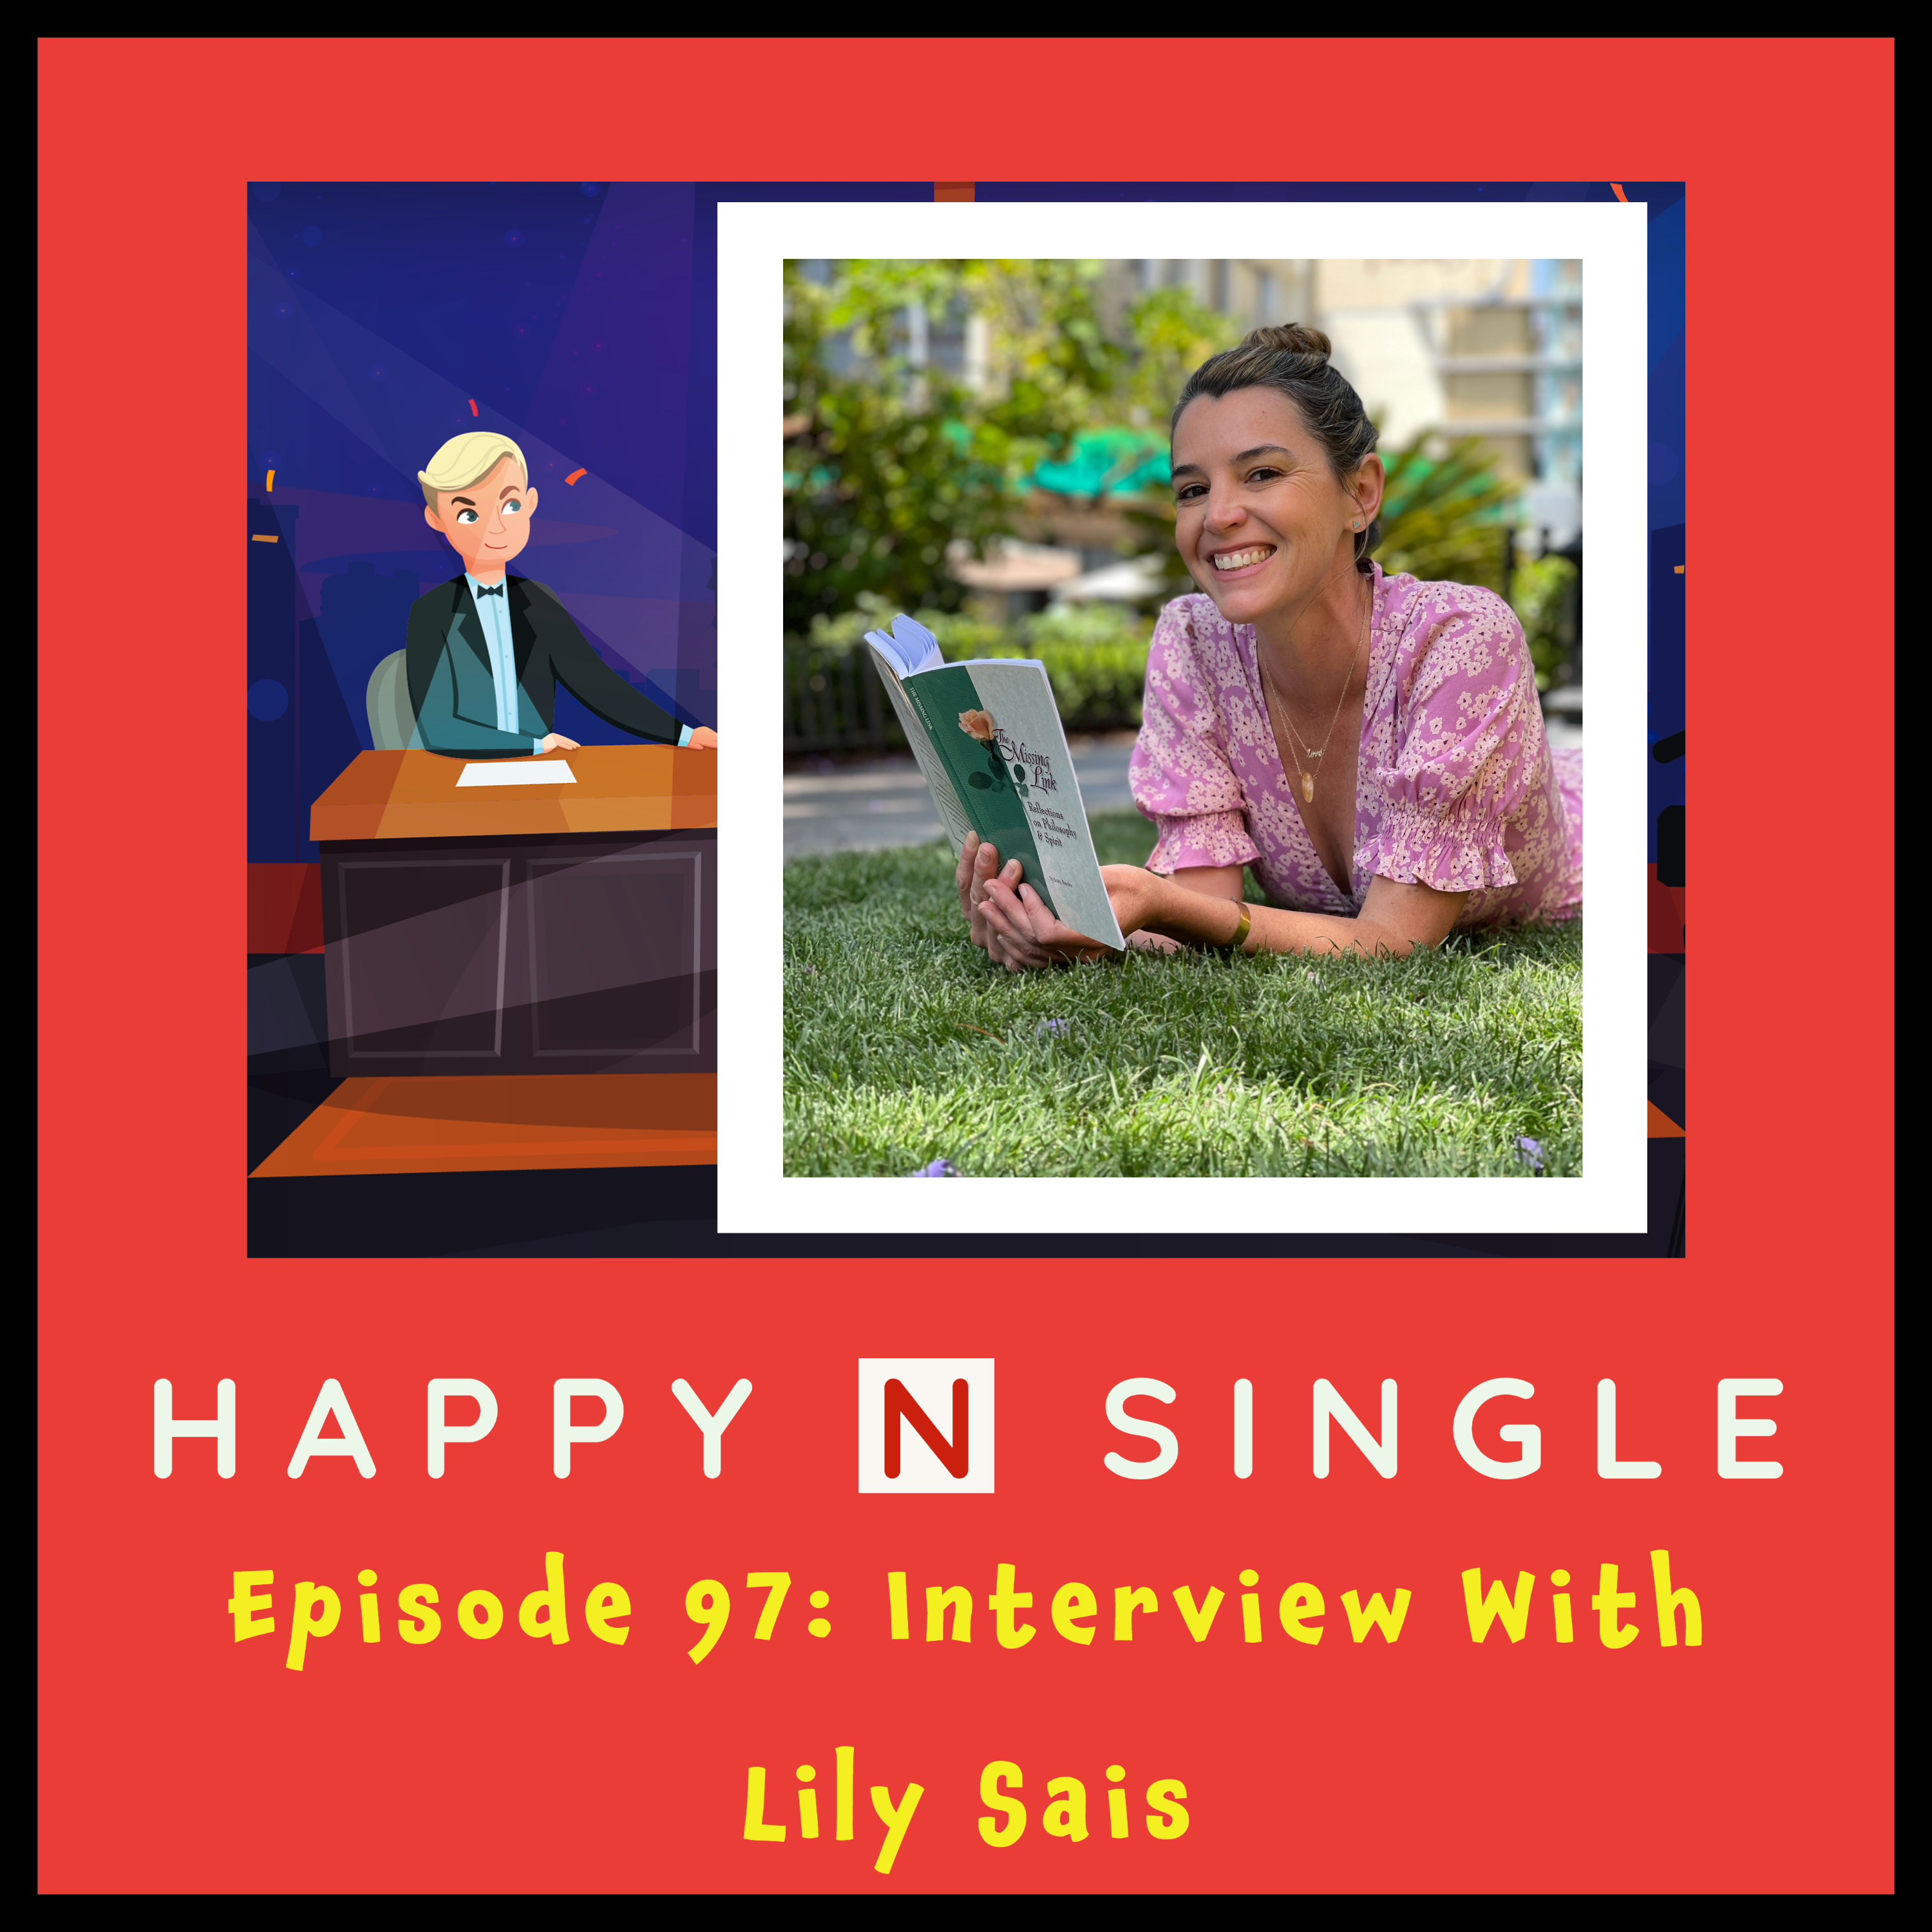 Interview With Lily Sais